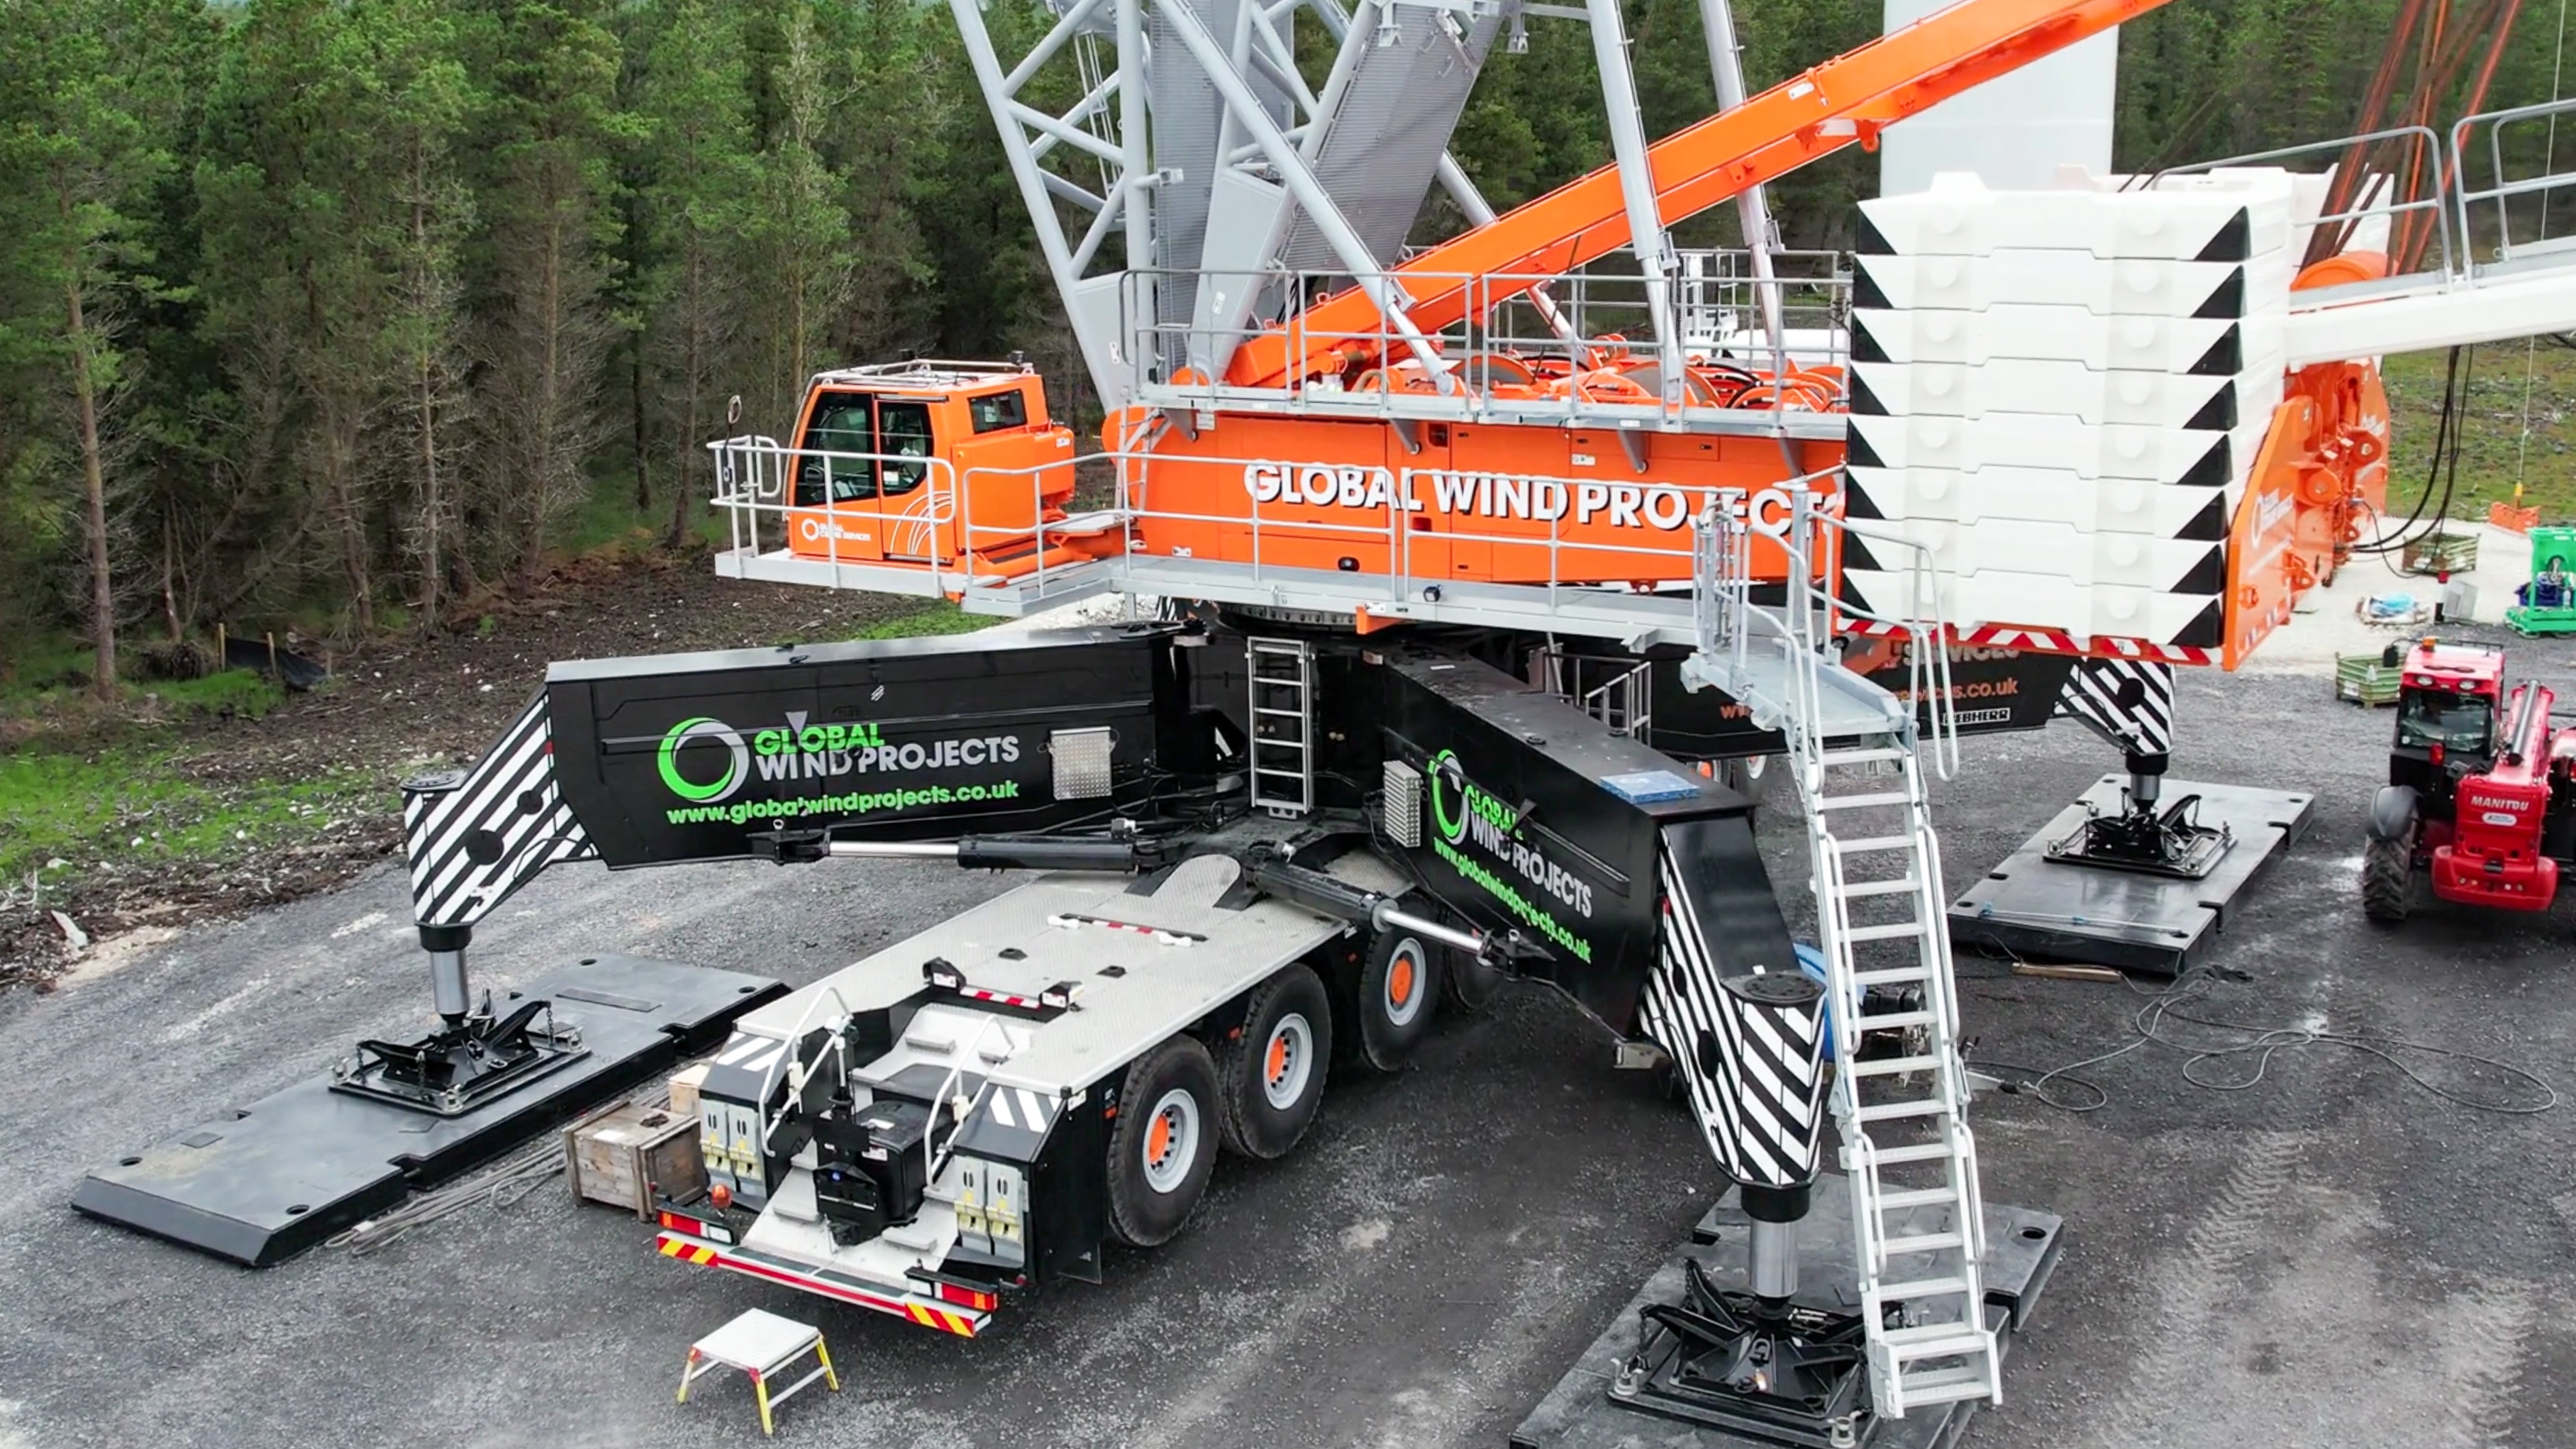 Global Wind Projects Makes Multi-Million Pound Investment in Liebherr LG 1750 Crane as It Gears up to Meet Wind Sector Demand